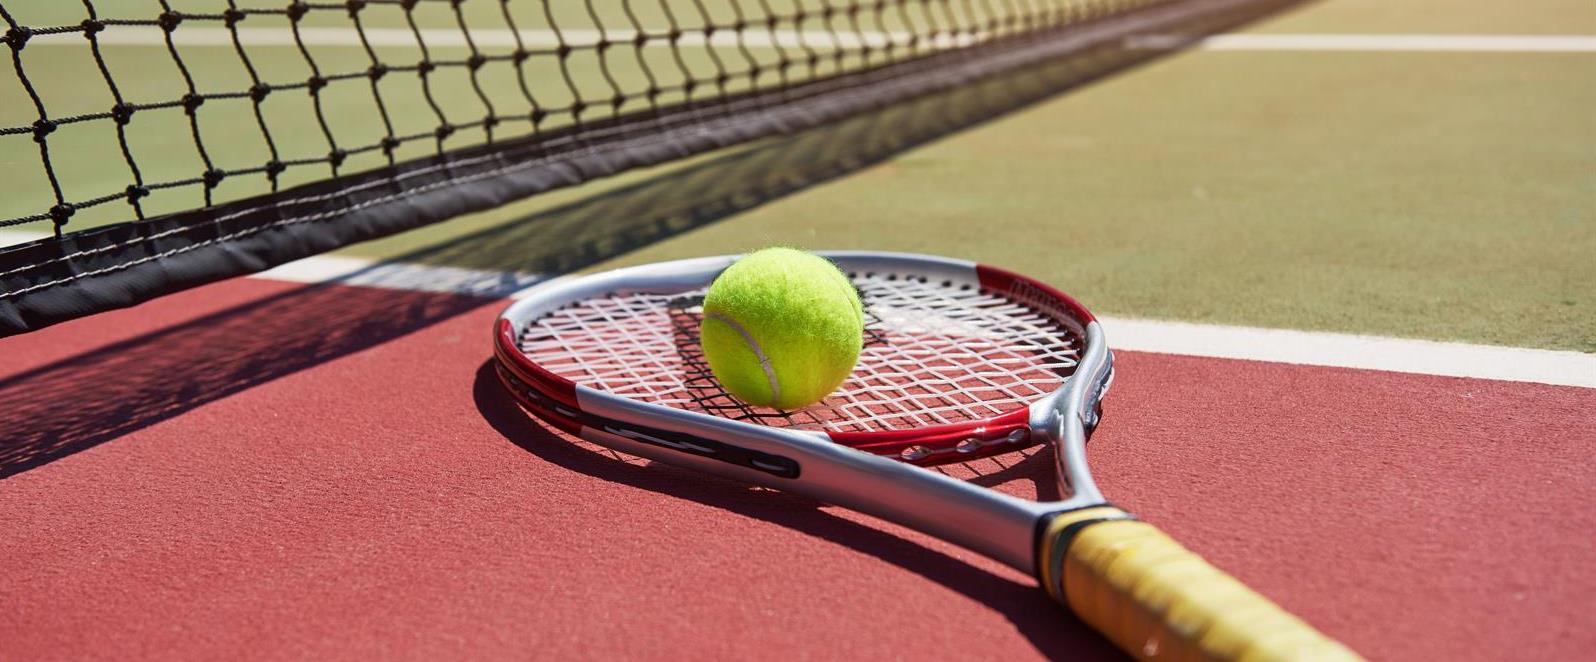 tennis-racket-and-new-tennis-ball-on-freshly-painted-tennis-court